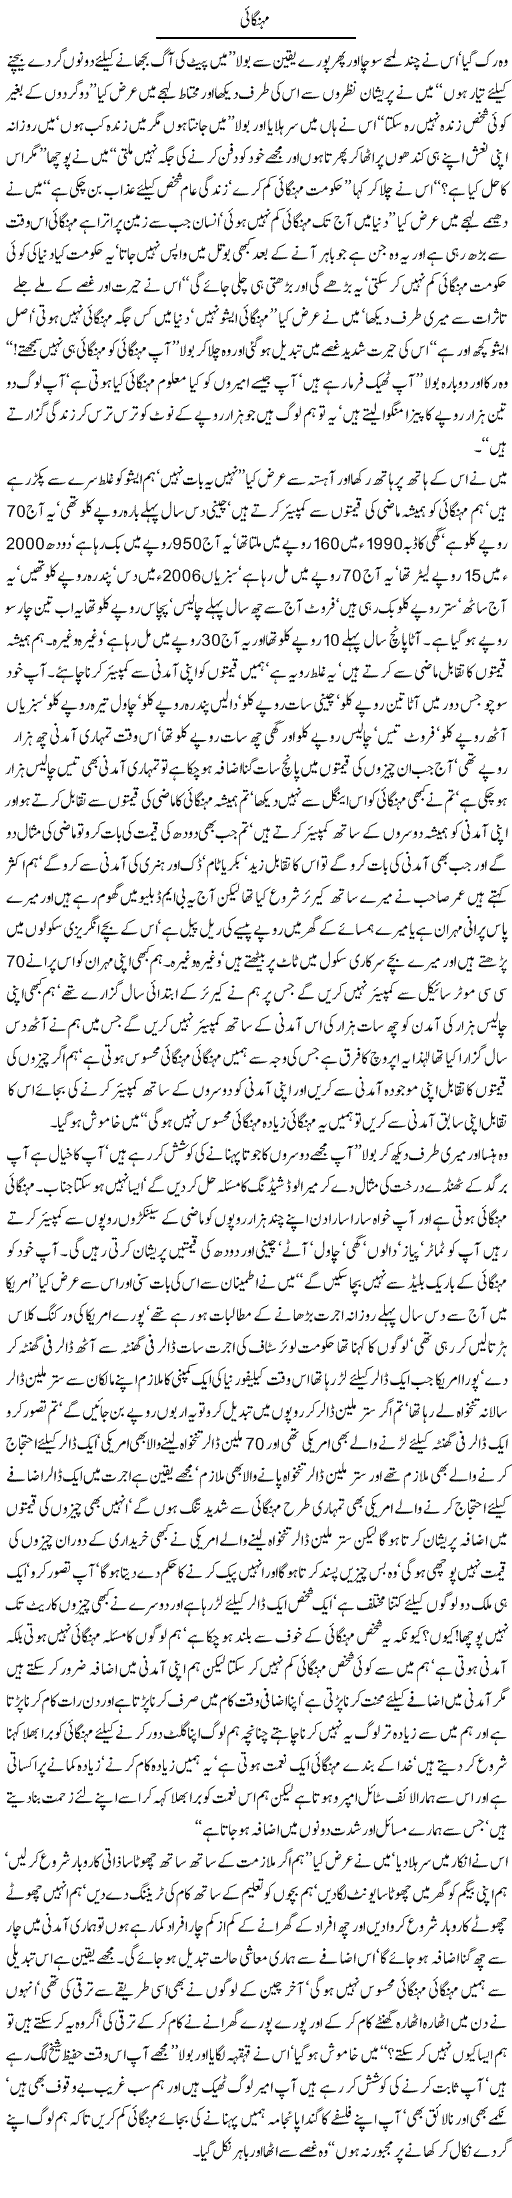 Inflation Express Column Javed Chaudhry 9 June 2011